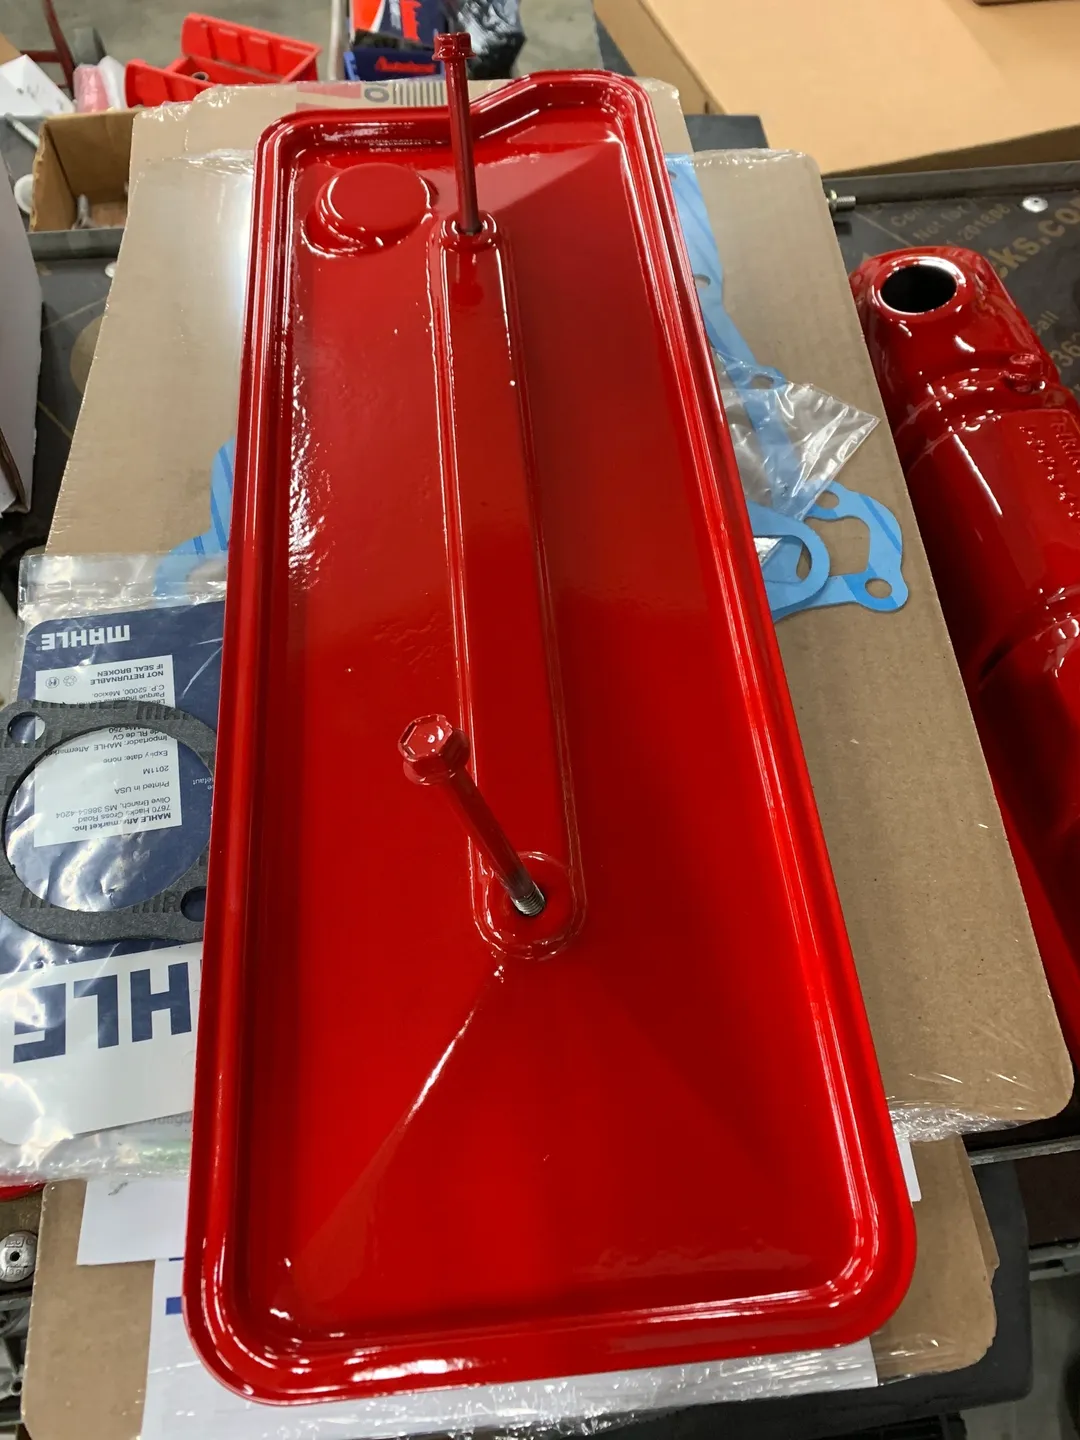 Cherry red, fabricated auto part